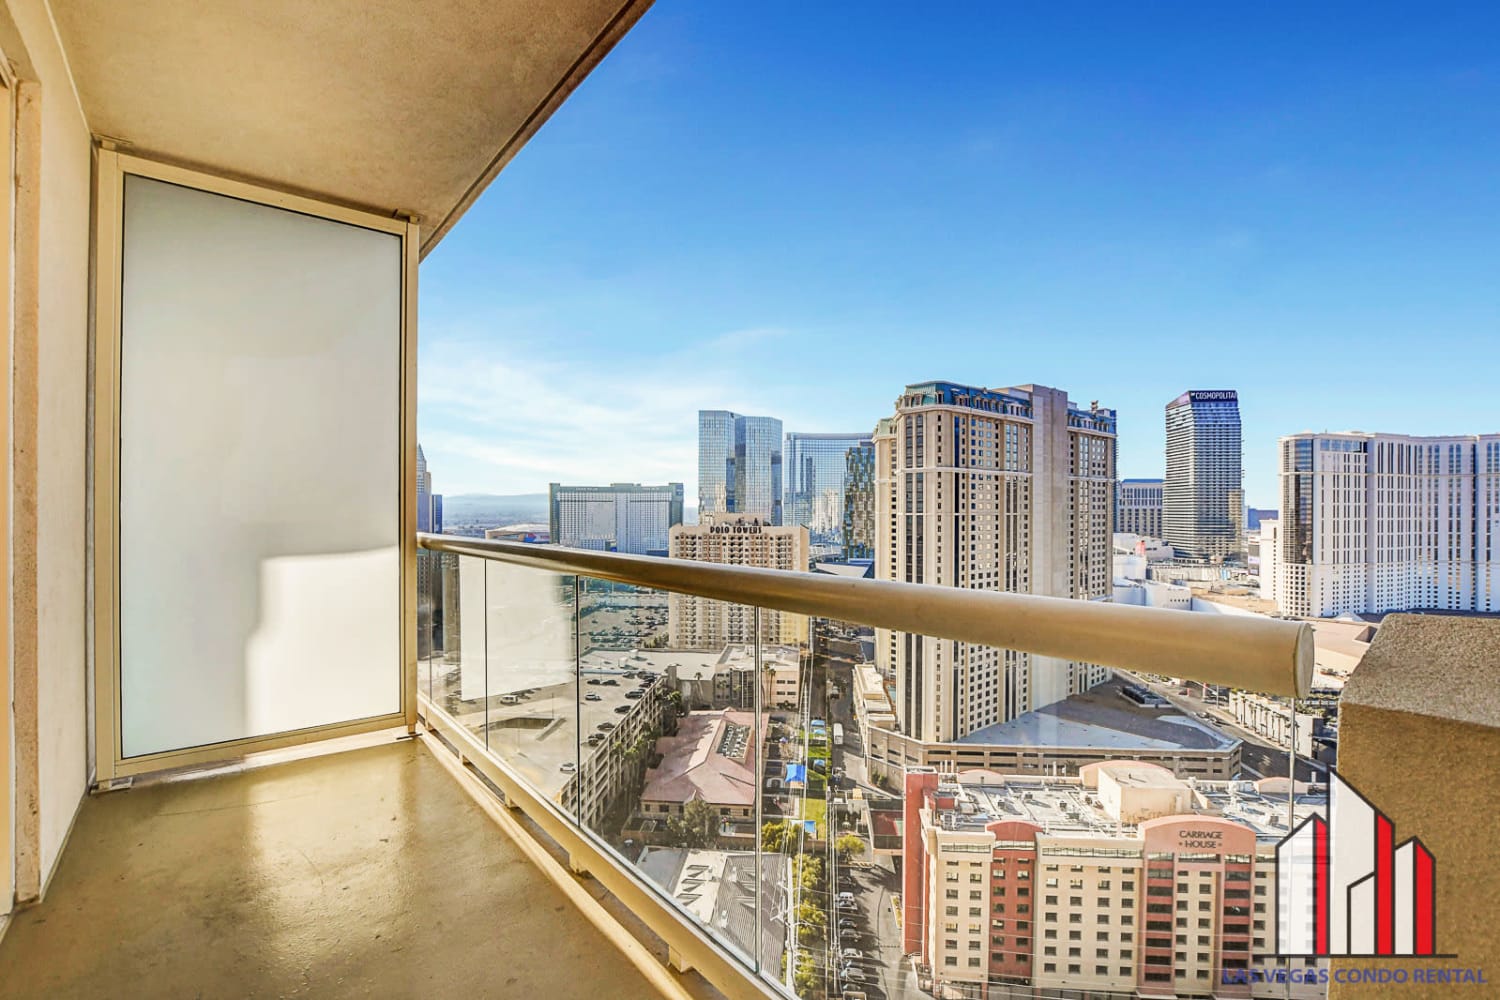 MGM Signature-25-707 Strip View Balcony Jacuzzi Studio - Condominiums for  Rent in Las Vegas, Nevada, United States - Airbnb